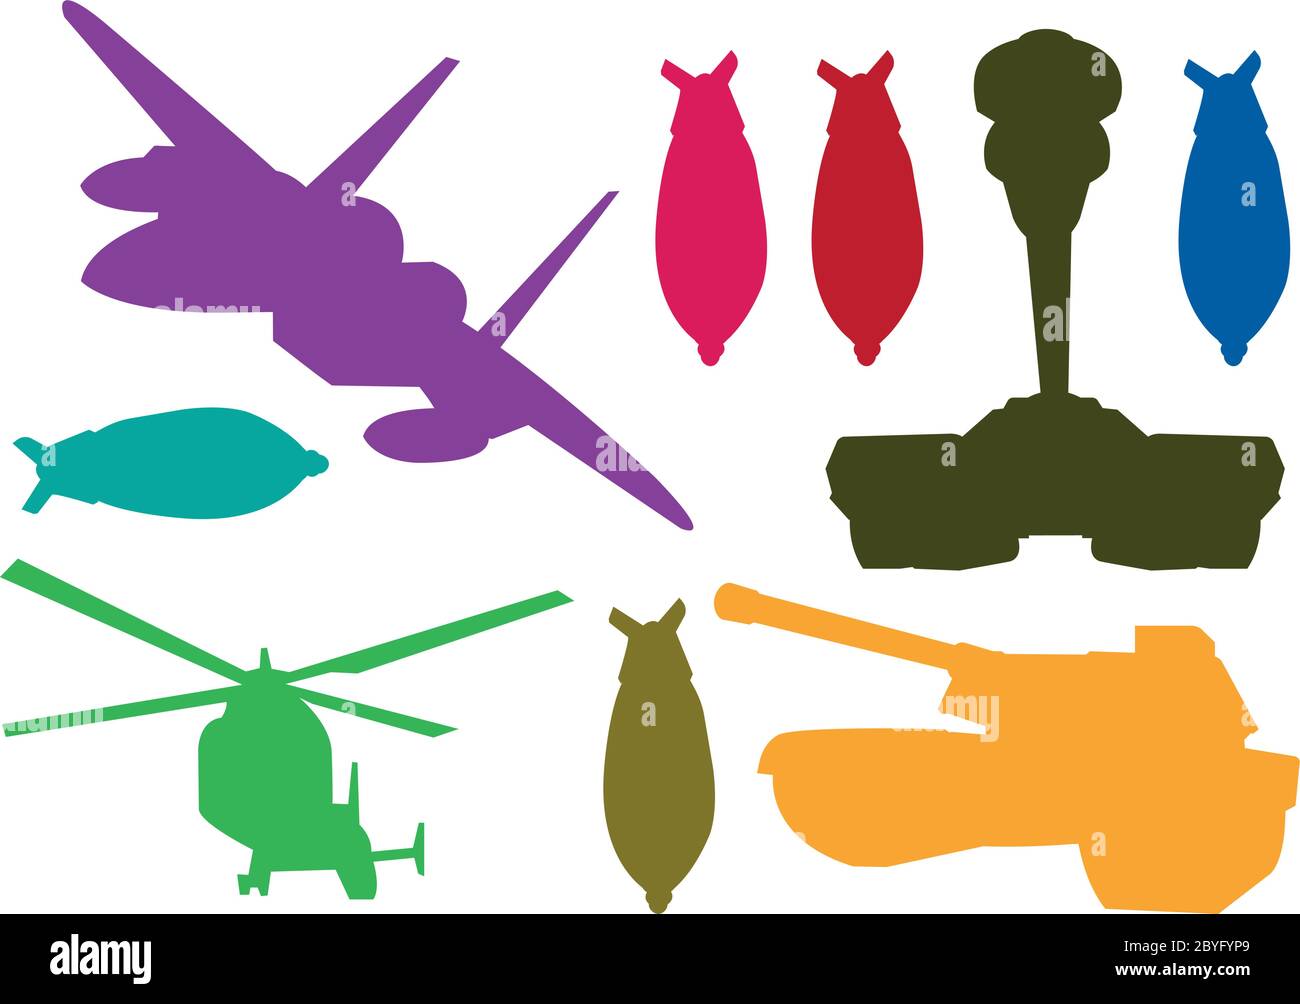 Silhouette vector illustration of war weapons in different colors. Stock Vector